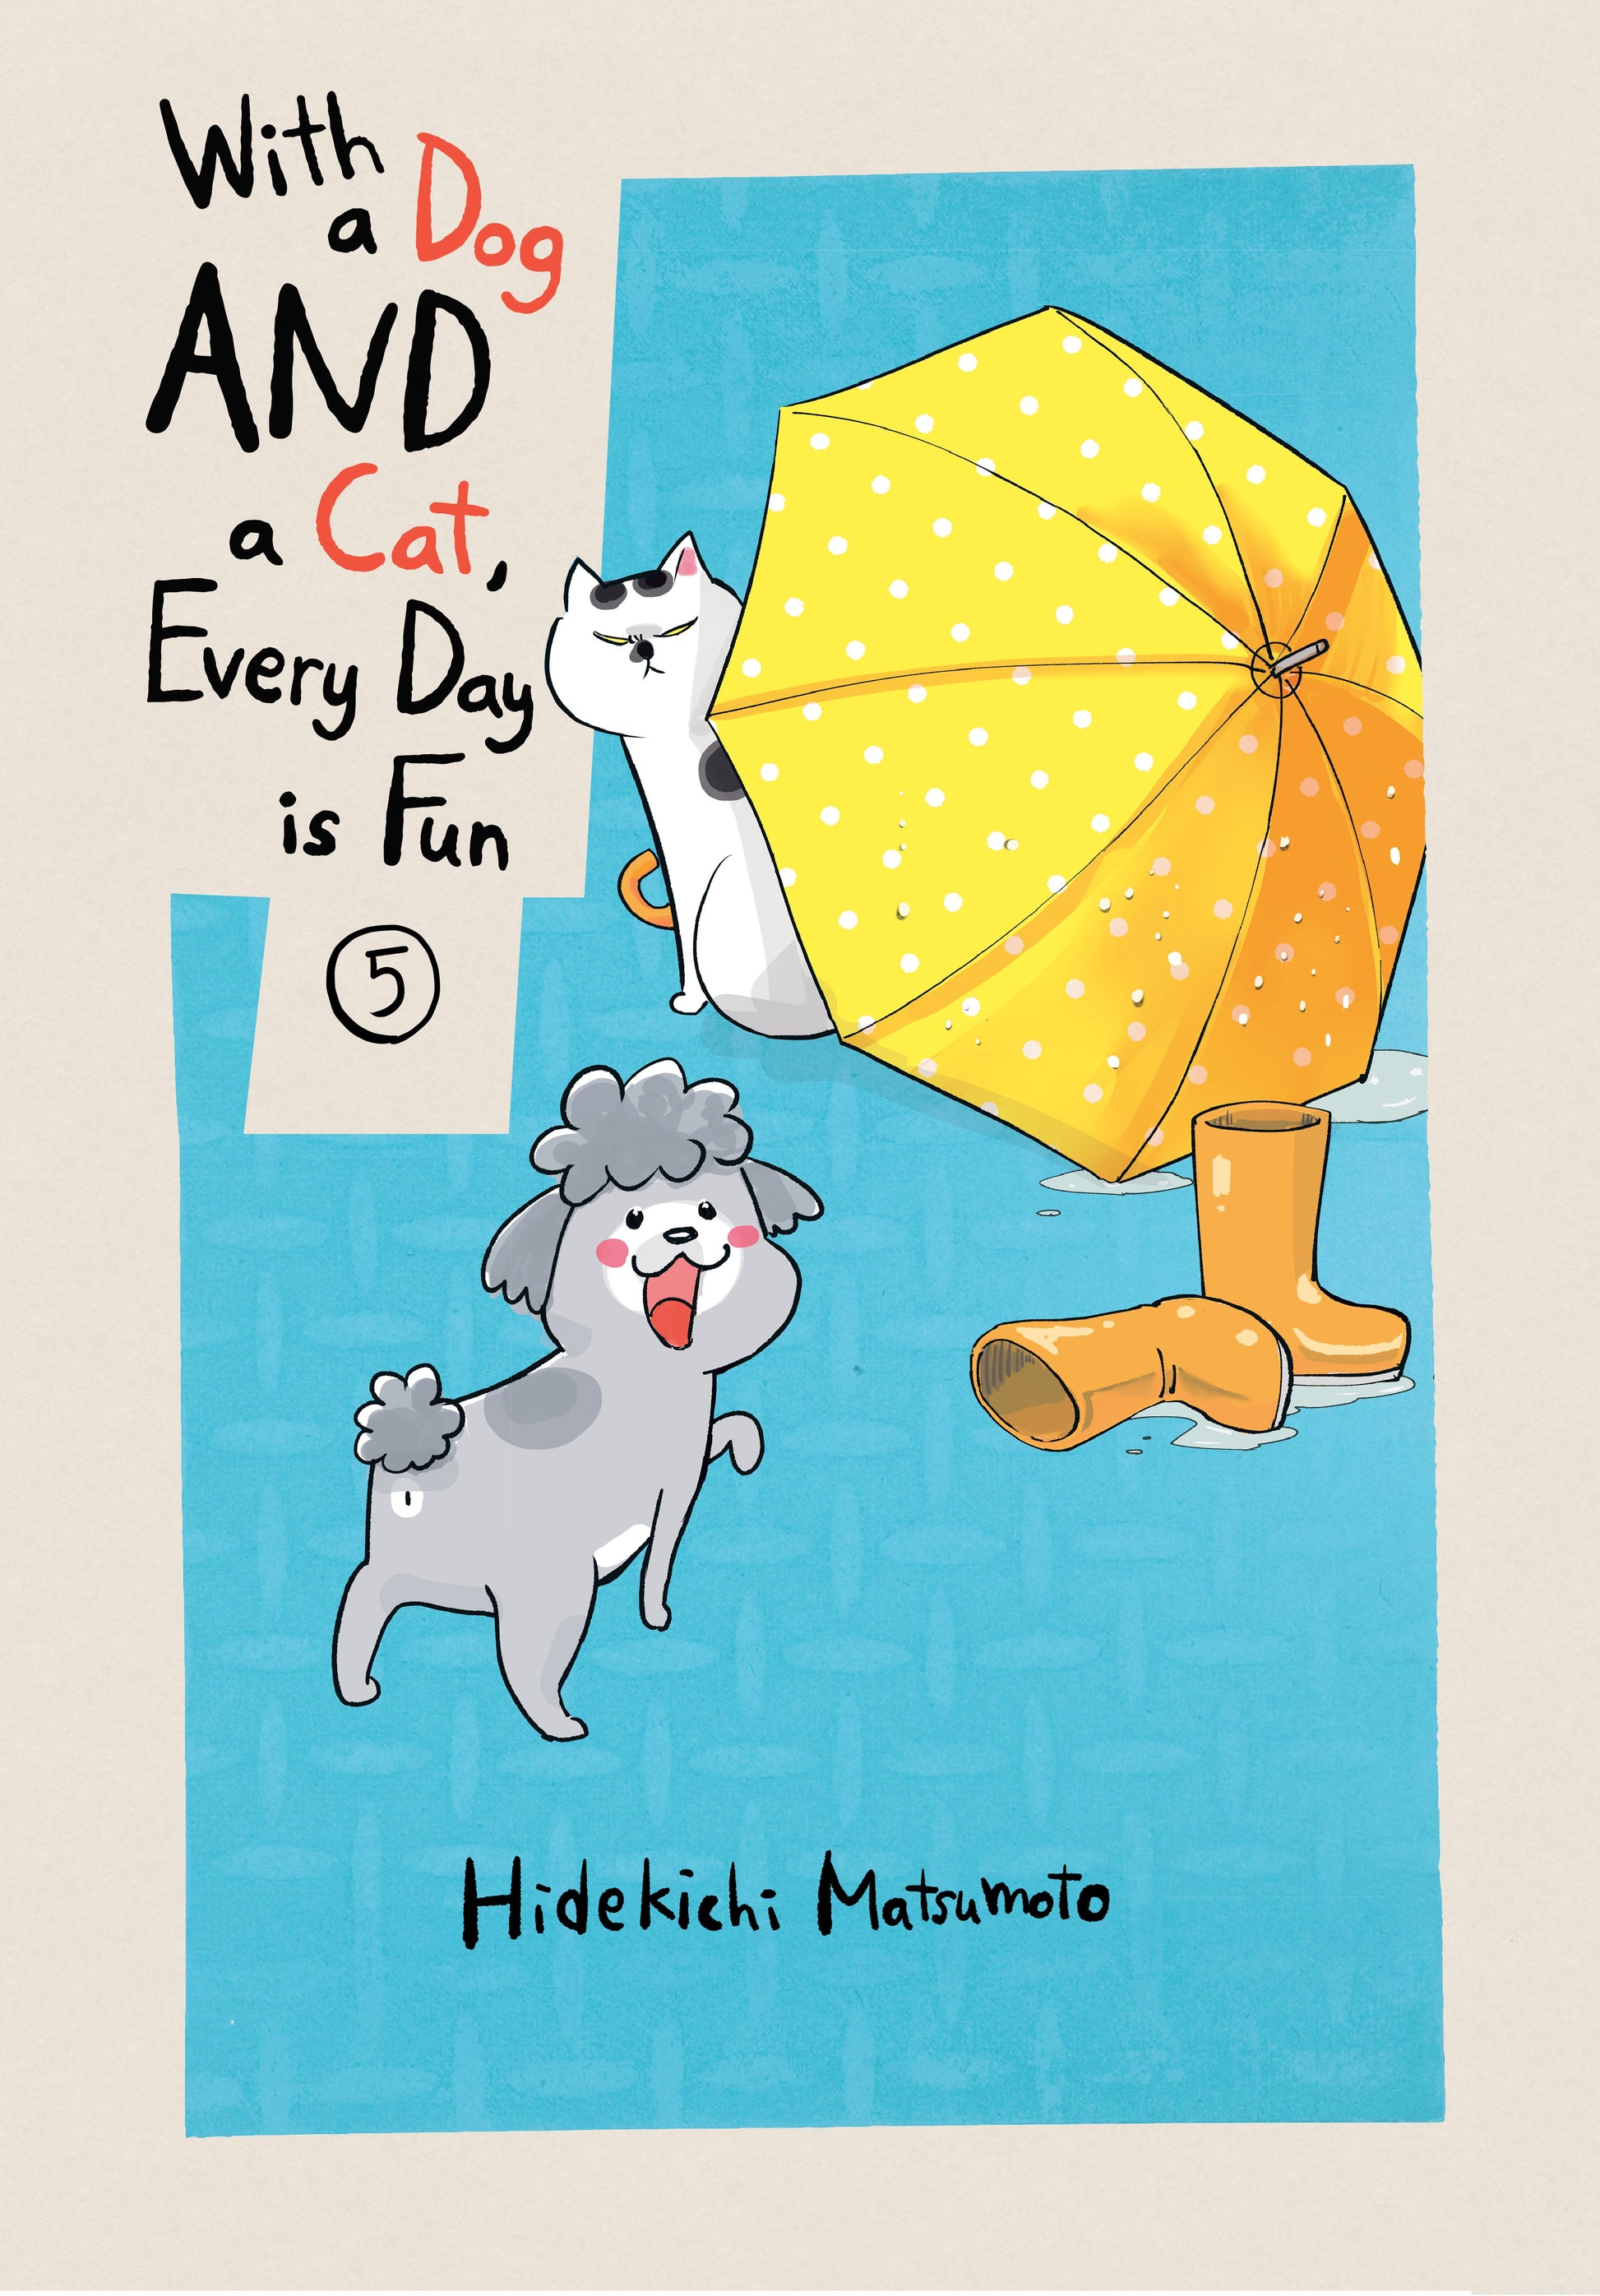 With a Dog AND a Cat, Every Day is Fun 5 - Manga Warehouse